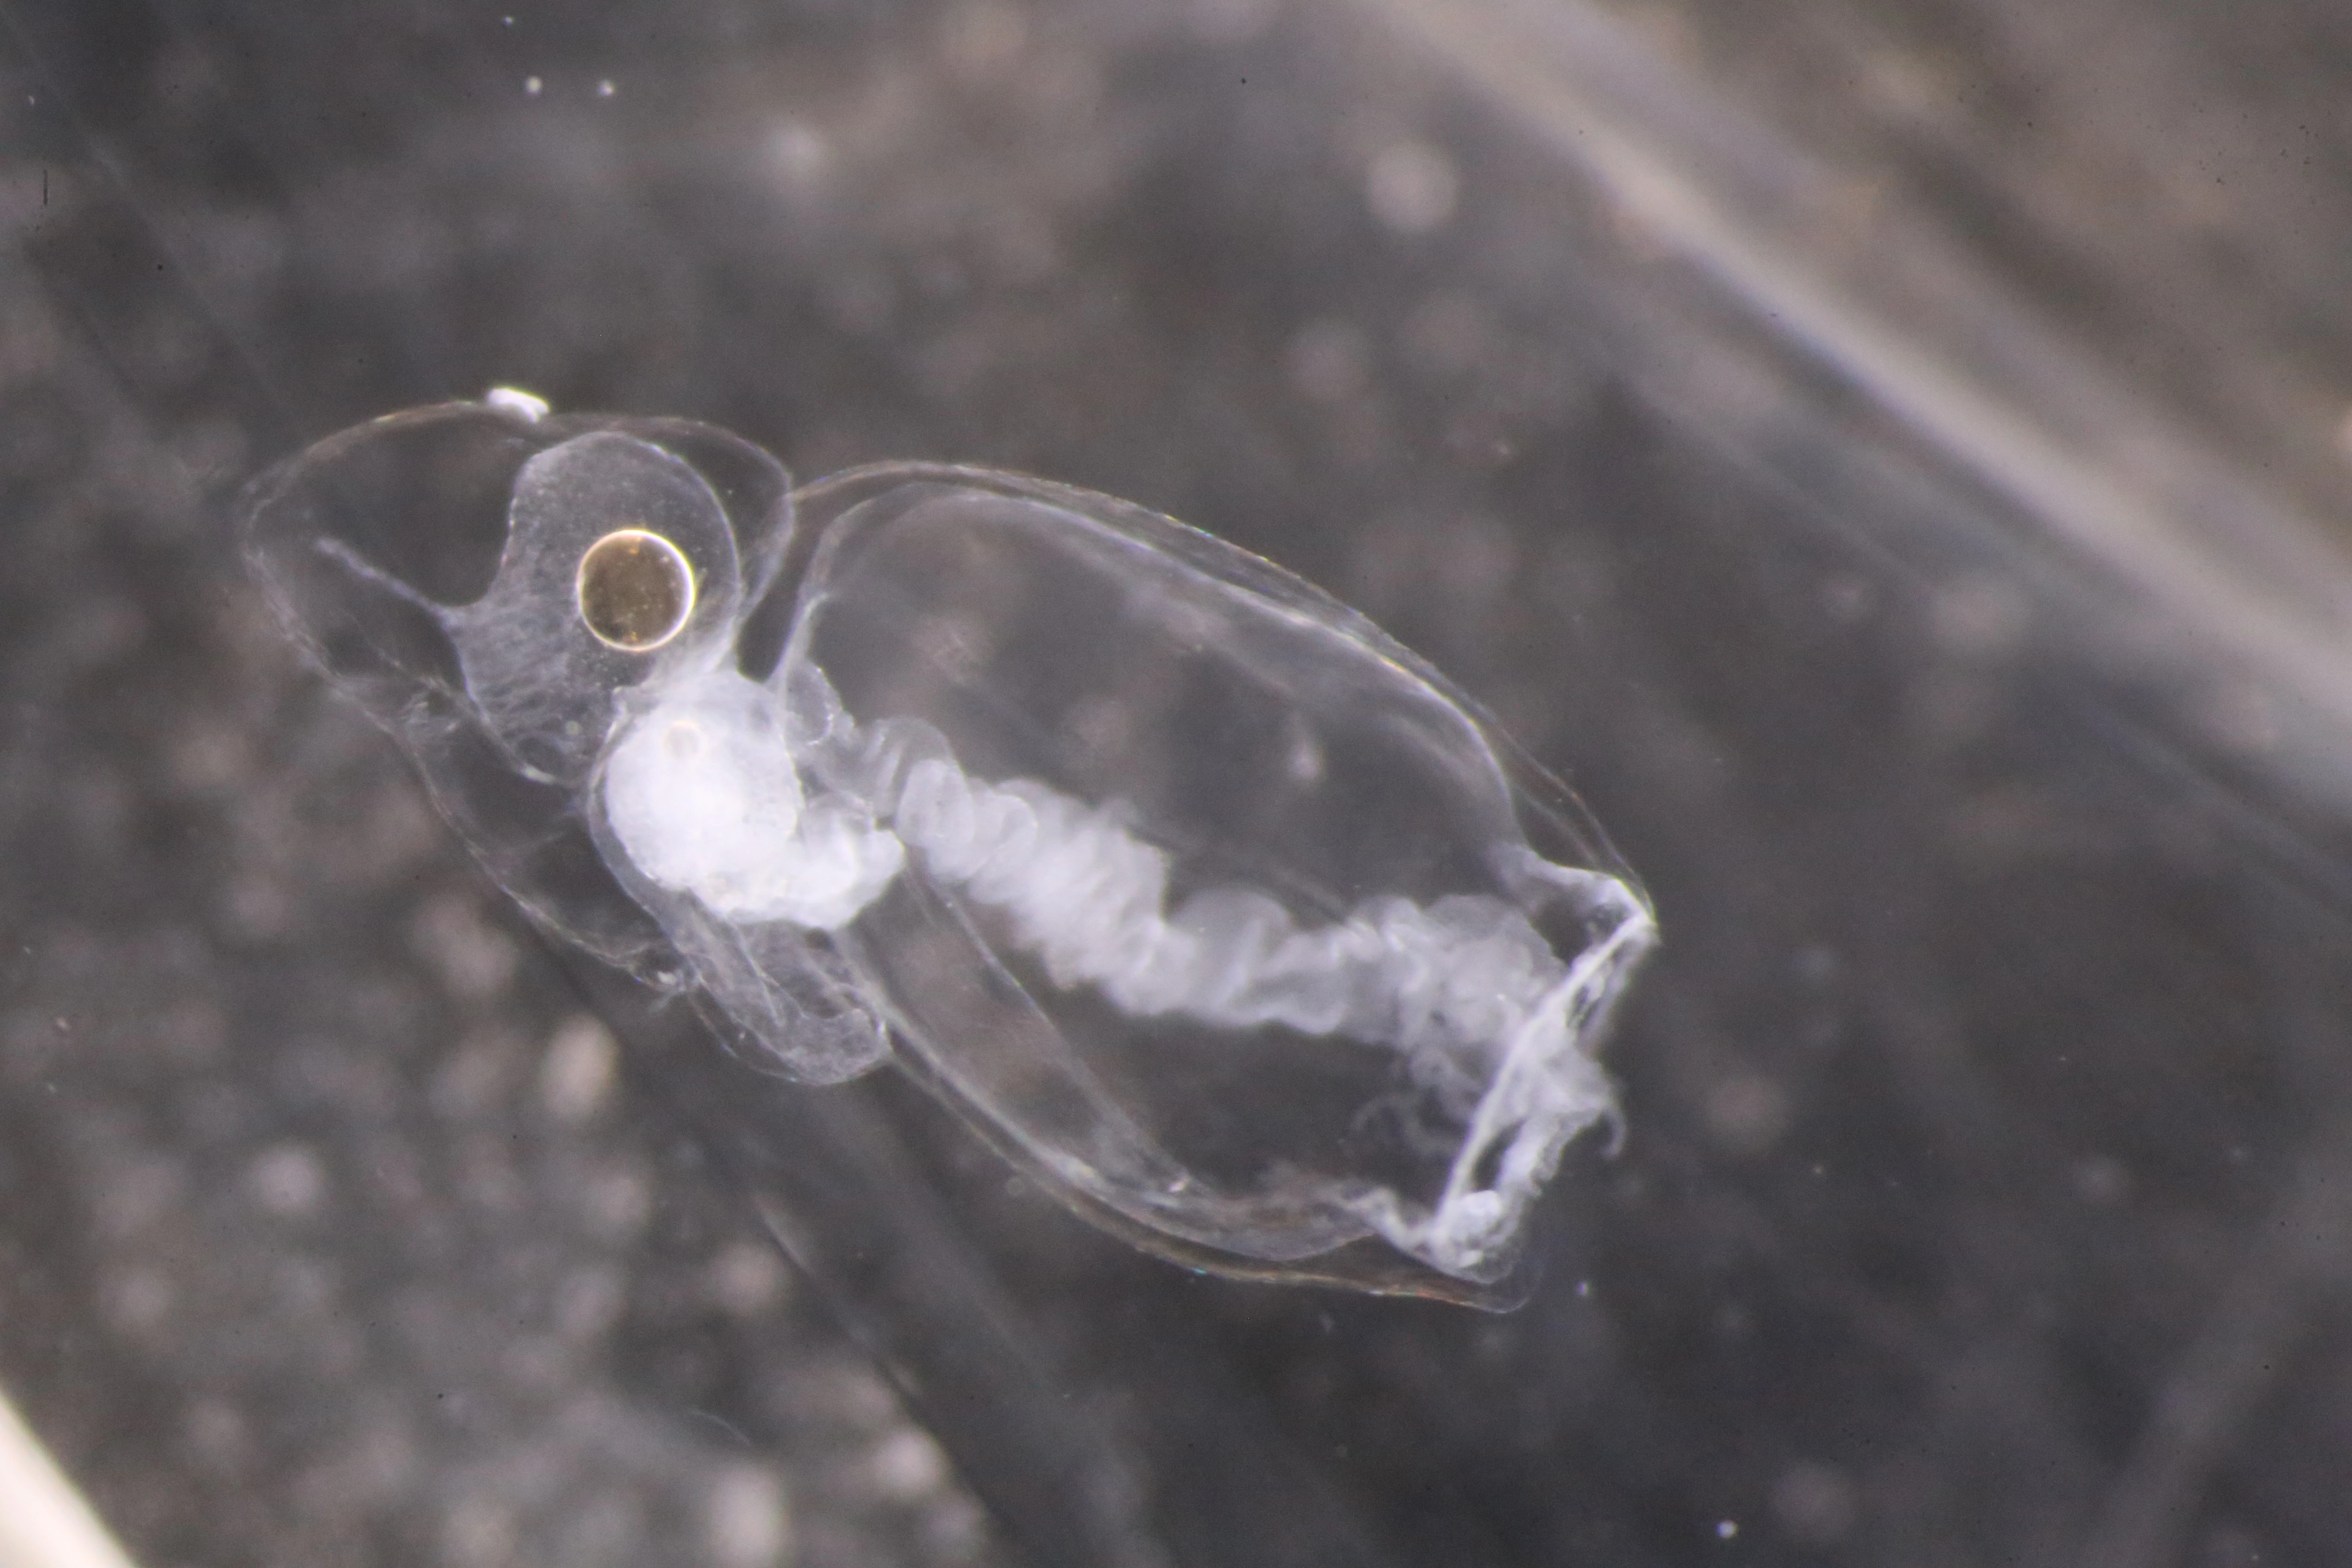 Hydrozoer: Dimophyes arctica.